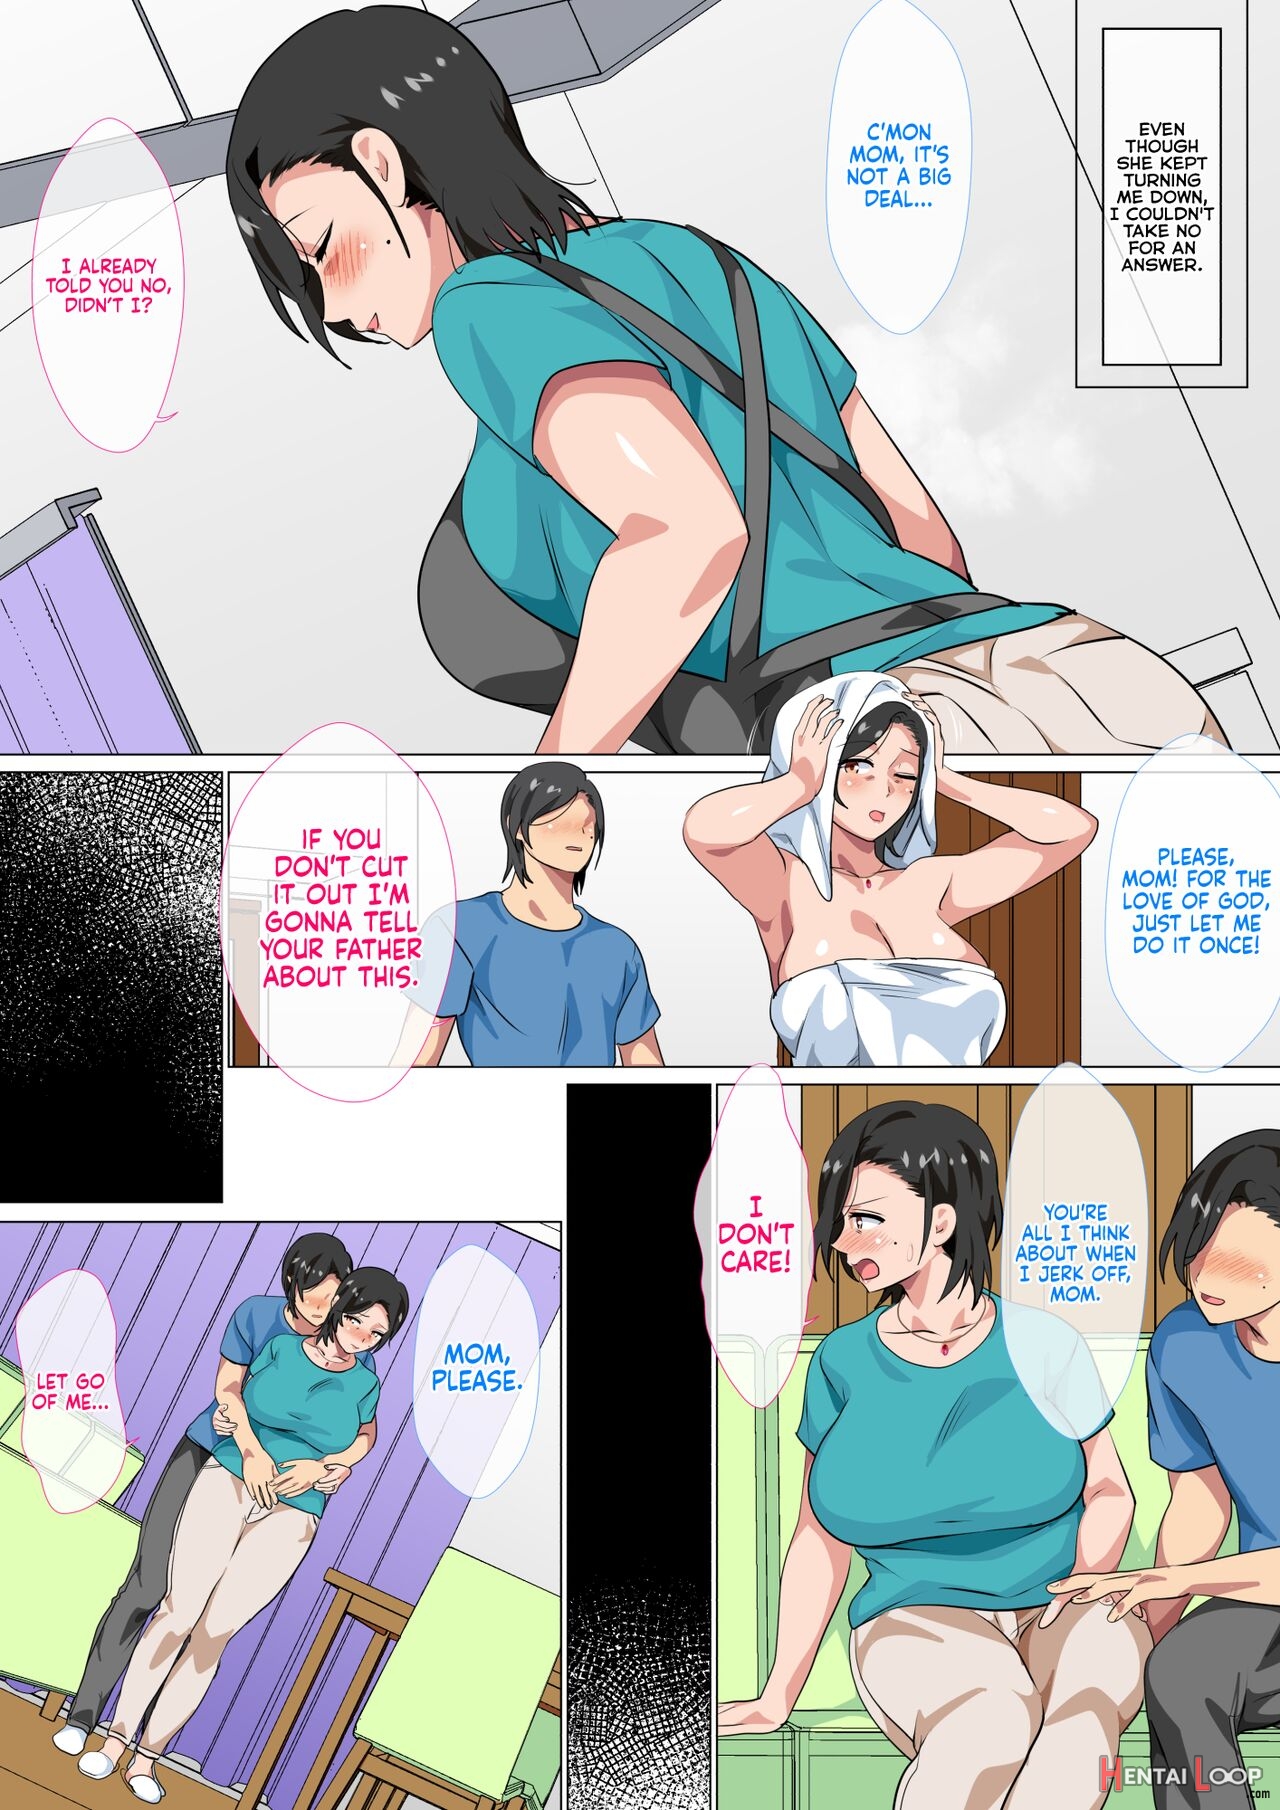 Let It Go Cartoon Porn - Page 7 of I Confessed To My Mom And She Let Me Have A One-day-only Sex-fest  (by Spices) - Hentai doujinshi for free at HentaiLoop